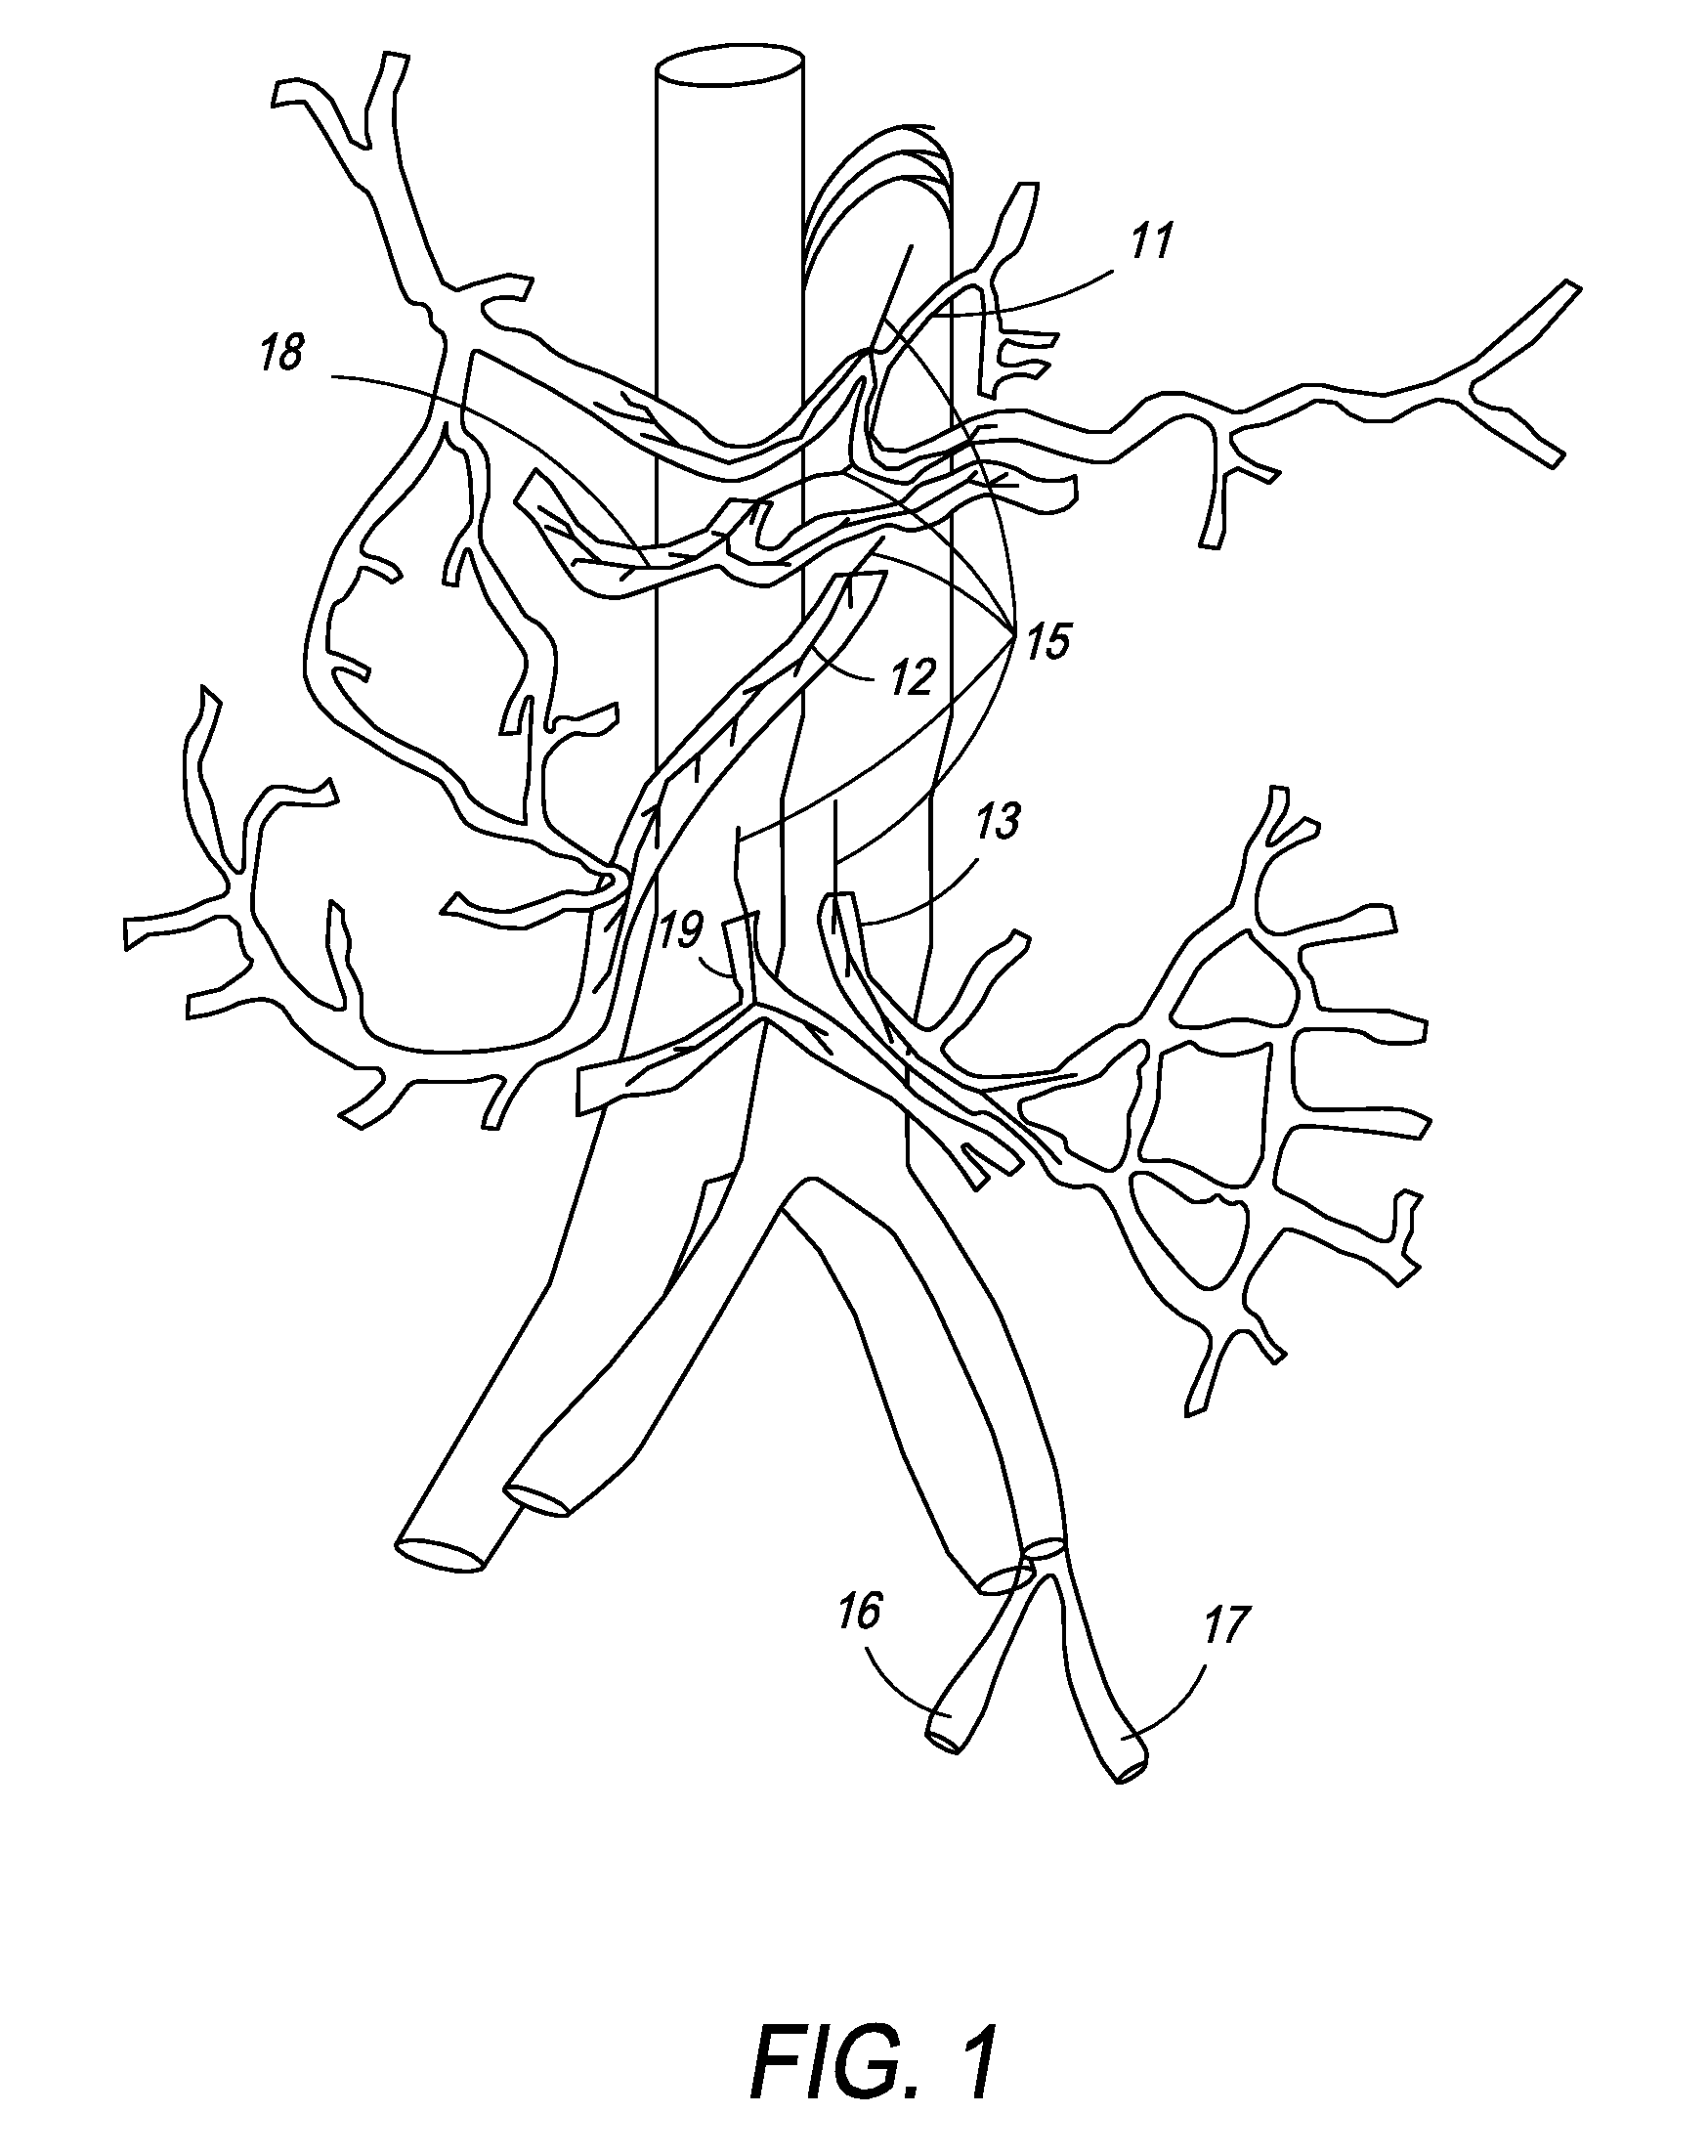 Method and apparatus for stimulating the vascular system